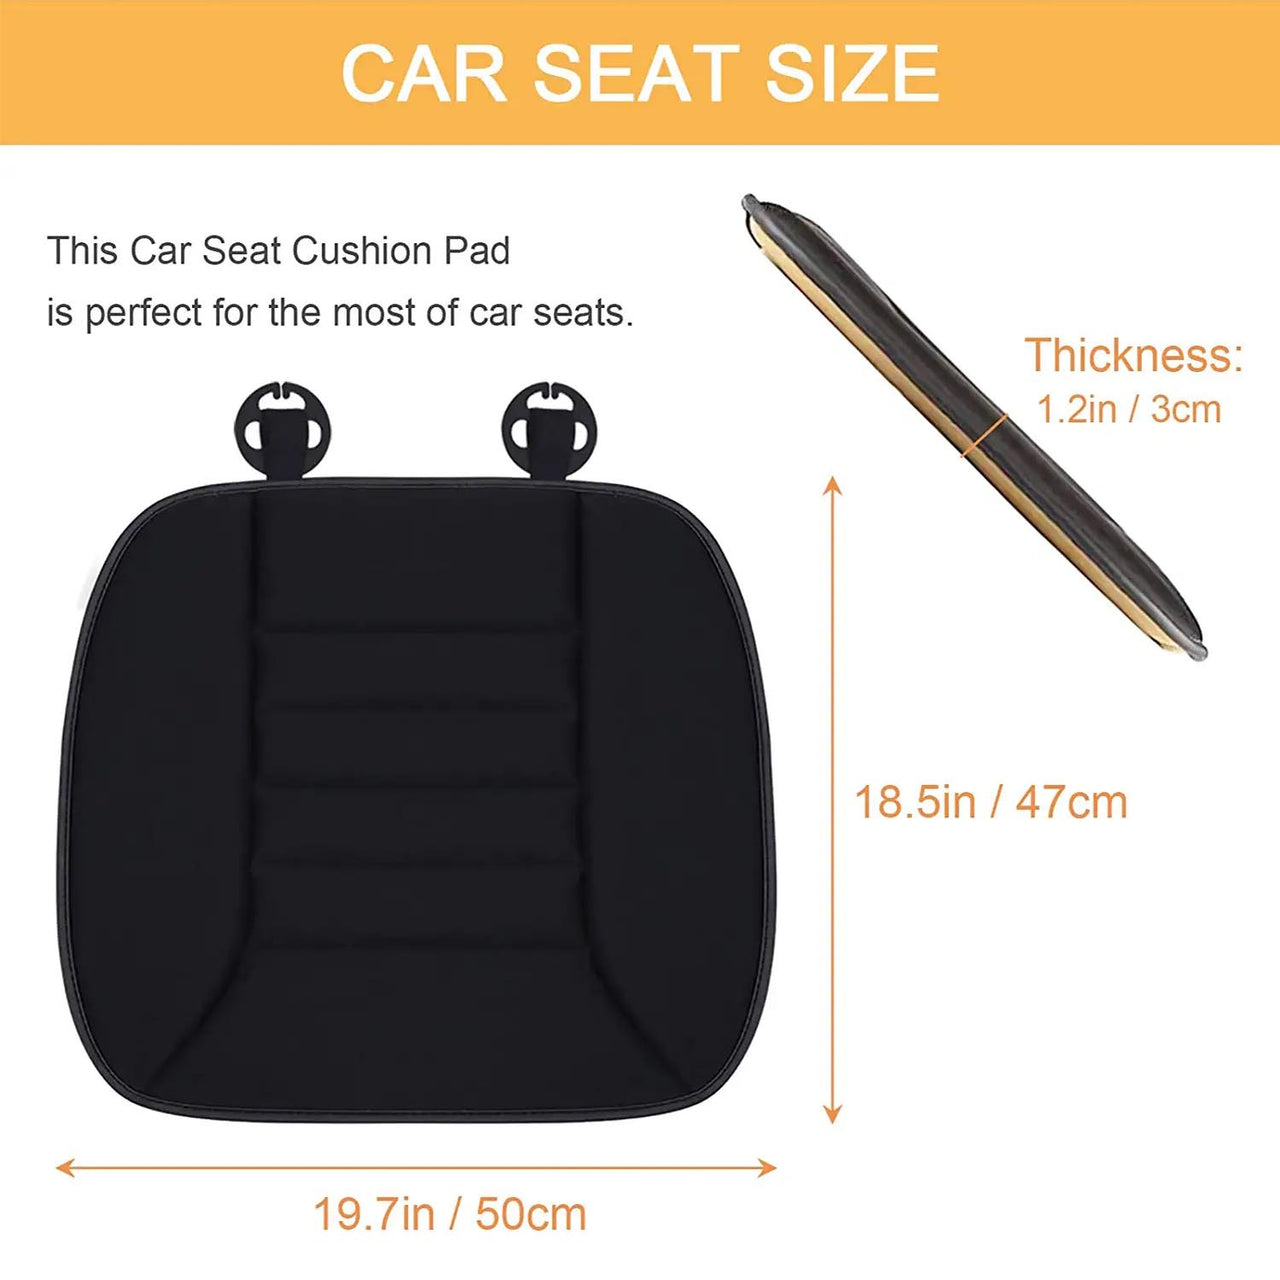 Car Seat Cushion with 1.2inch Comfort Memory Foam, Custom Logo For Your Cars, Seat Cushion for Car and Office Chair LR19989